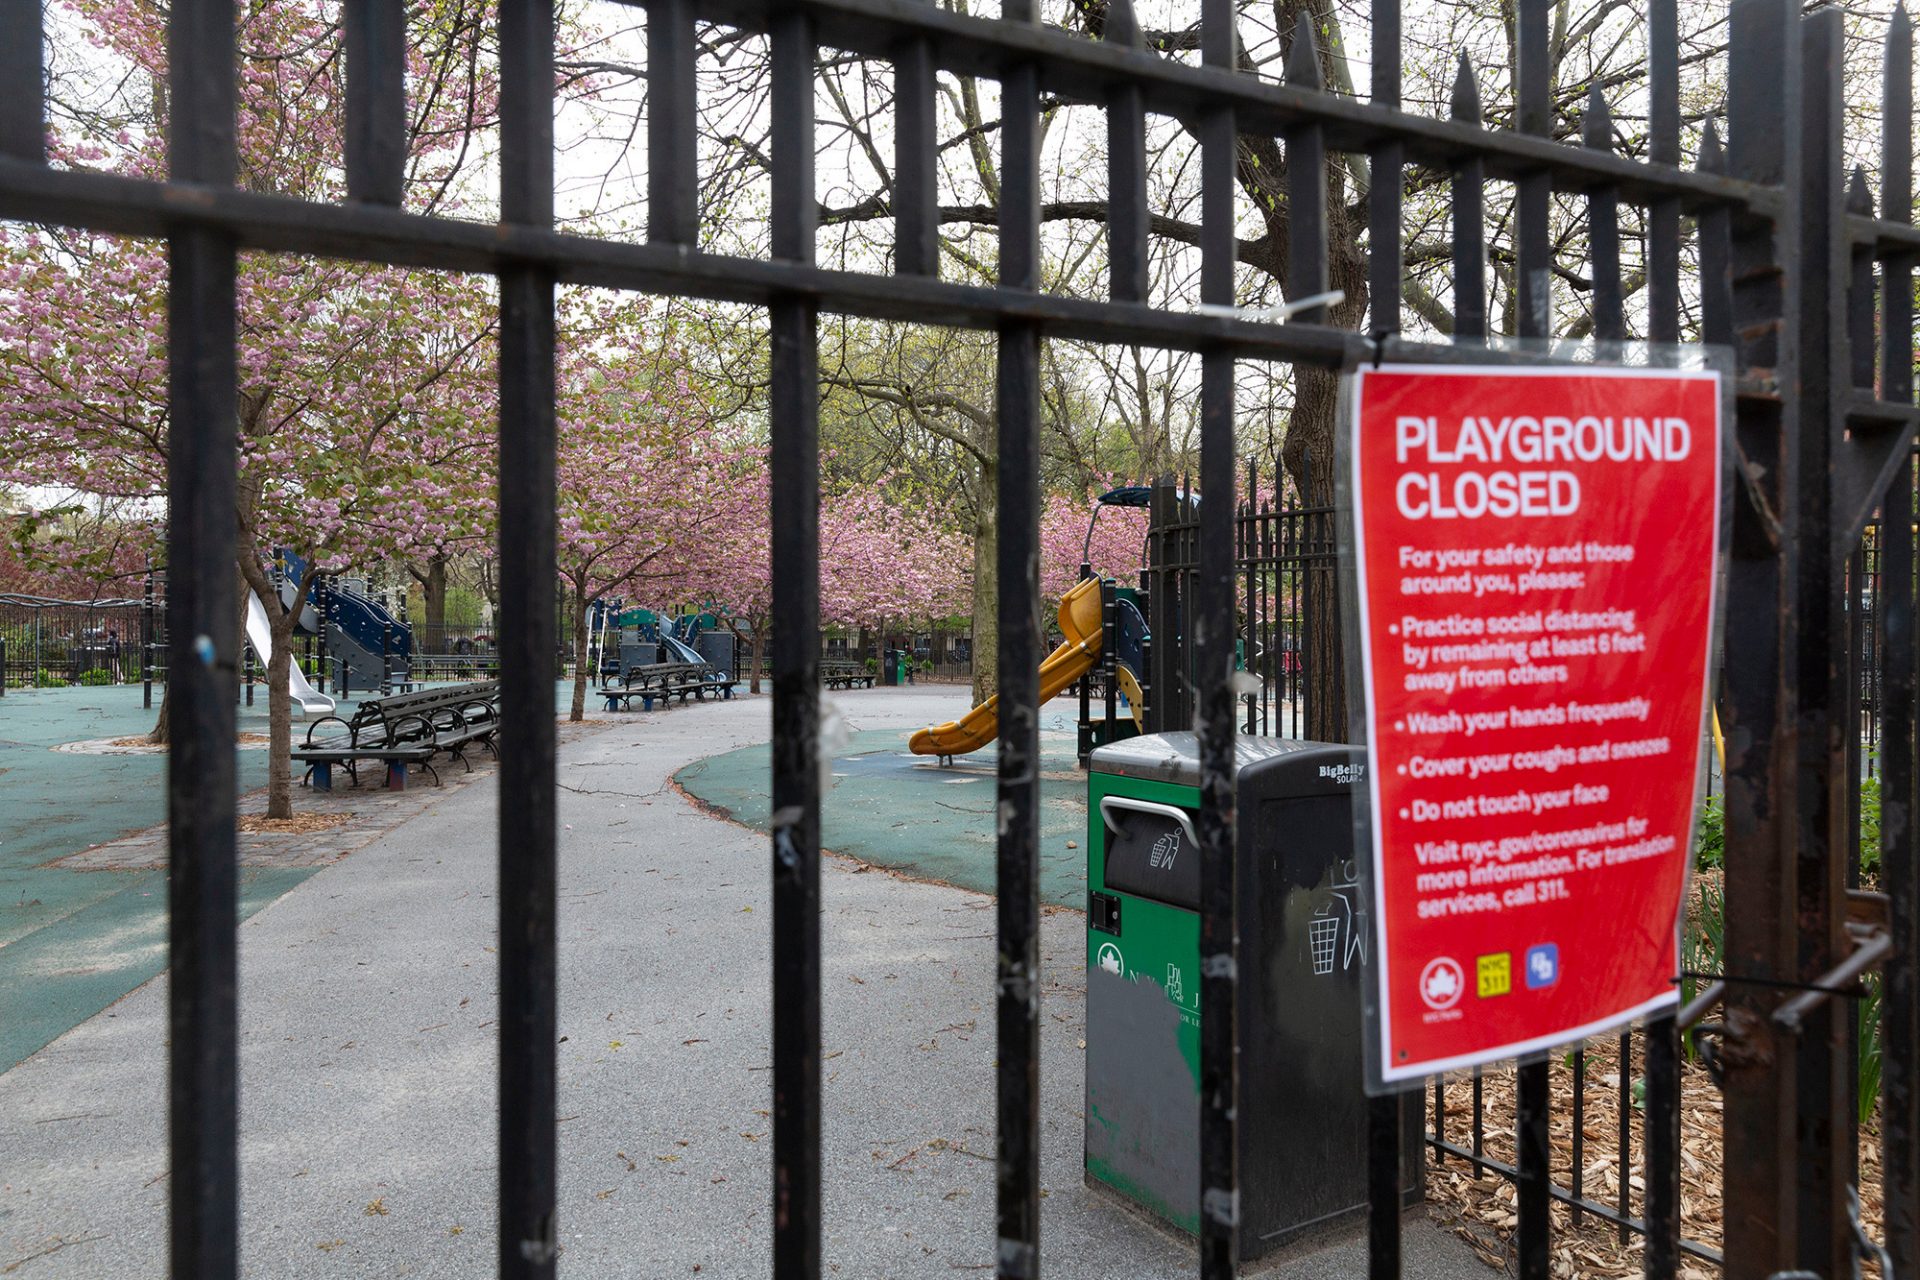 NYC playgrounds to reopen June 22 as metropolis enters Segment 2 of reopening